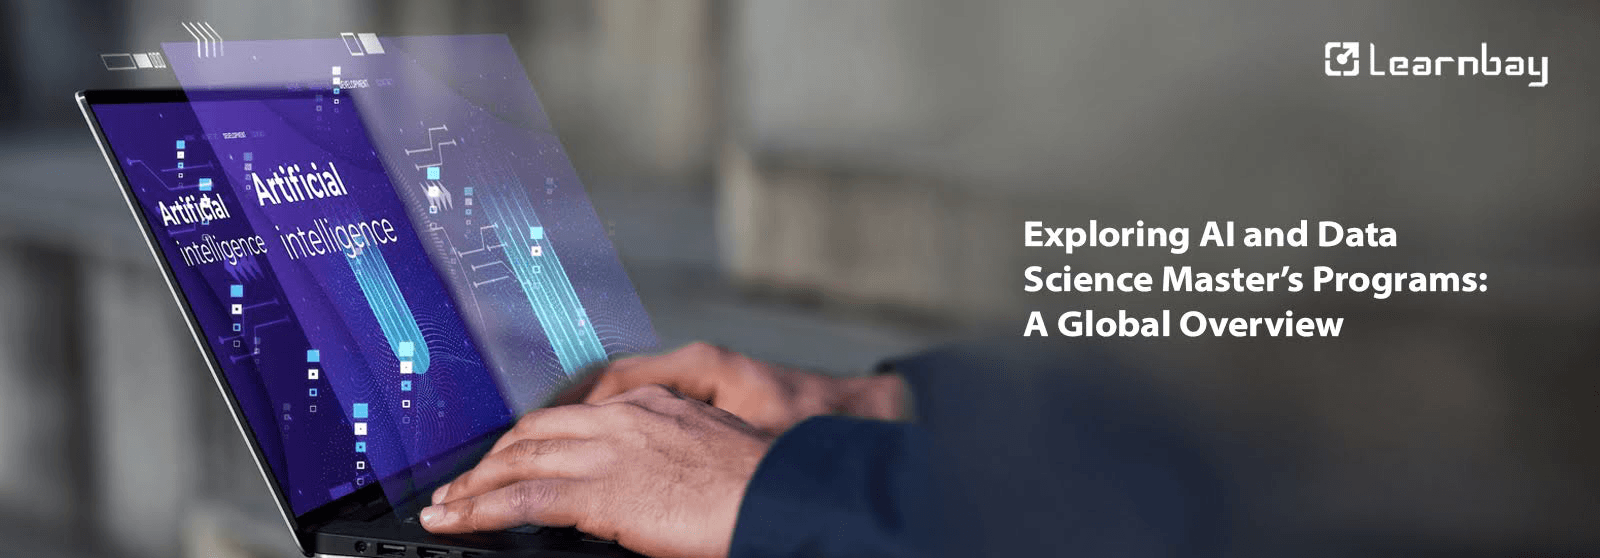 AI and Data Science Master's Programs, master's degree program in AI, data science masters programs online, master's in artificial intelligence